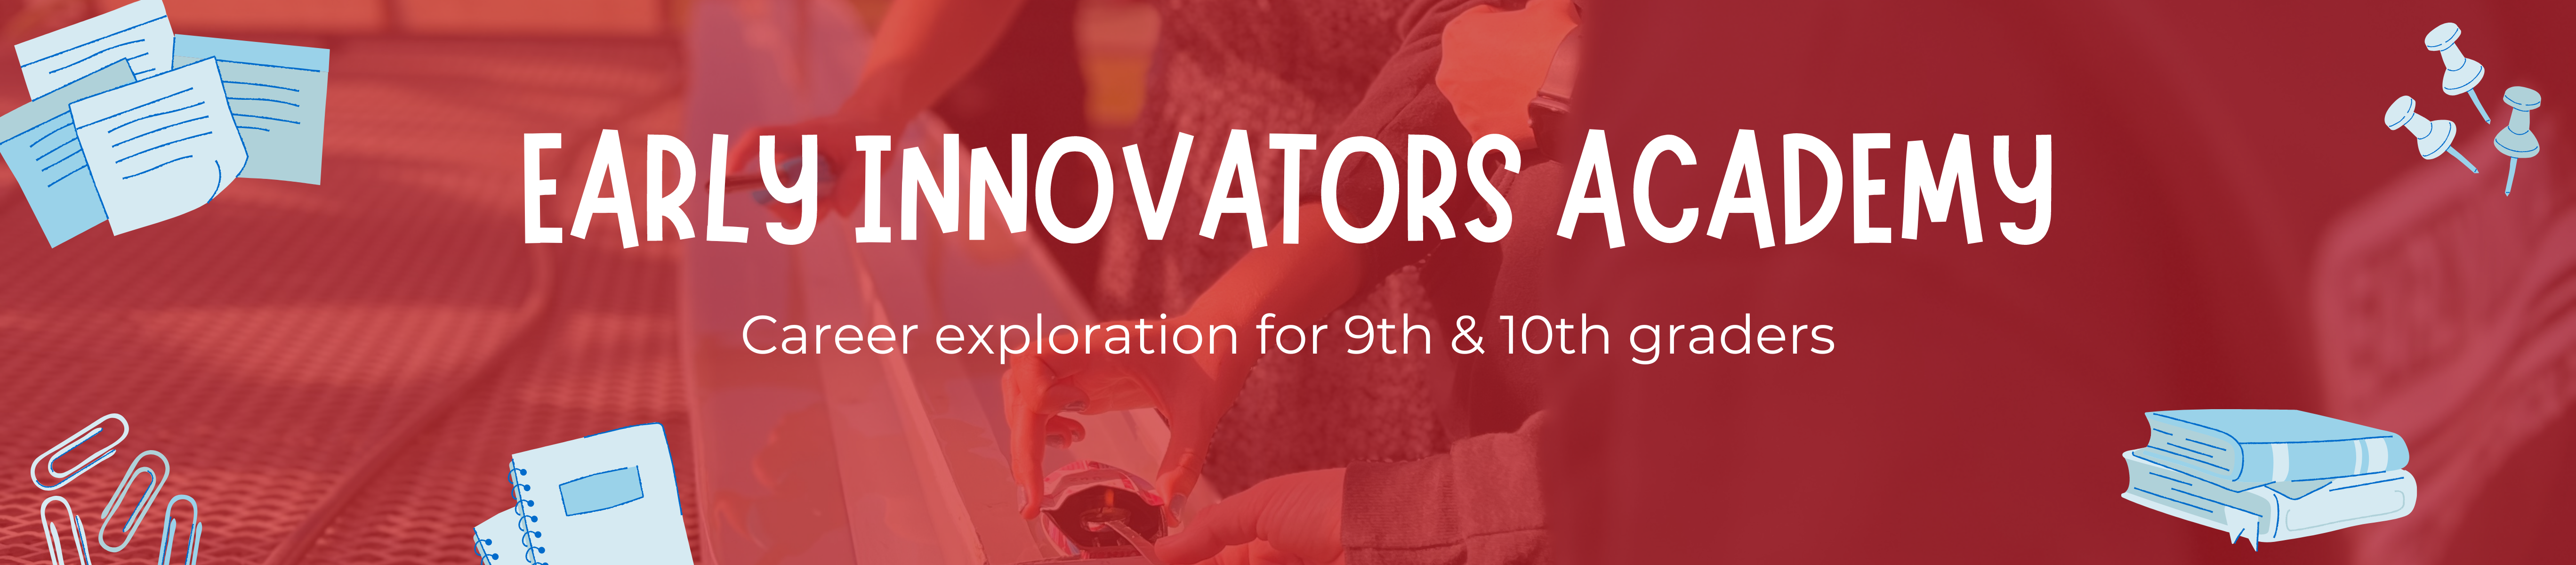 Early Innovators Academy banner